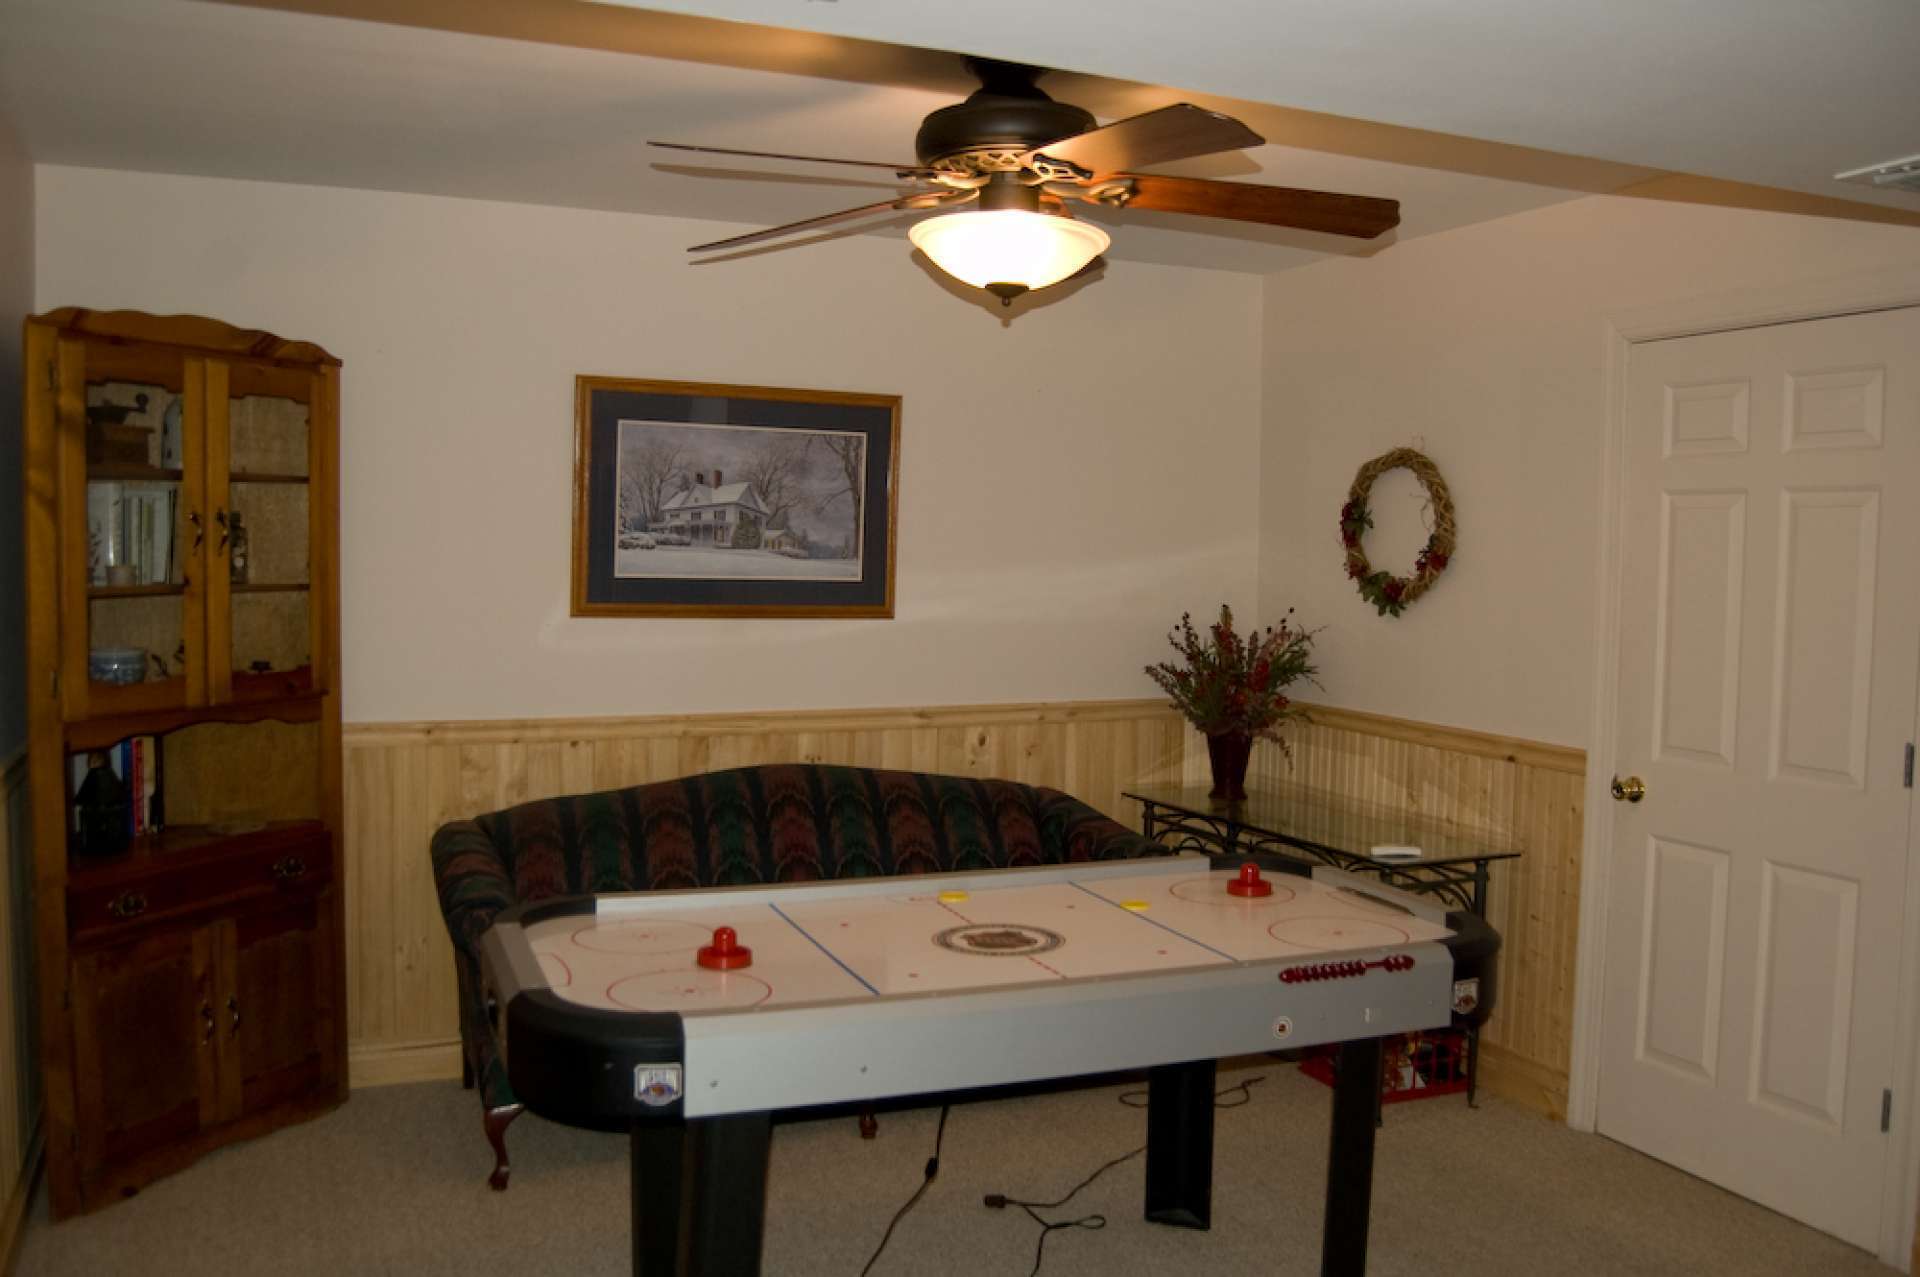 This large area is ideal for game tables or crafting space.